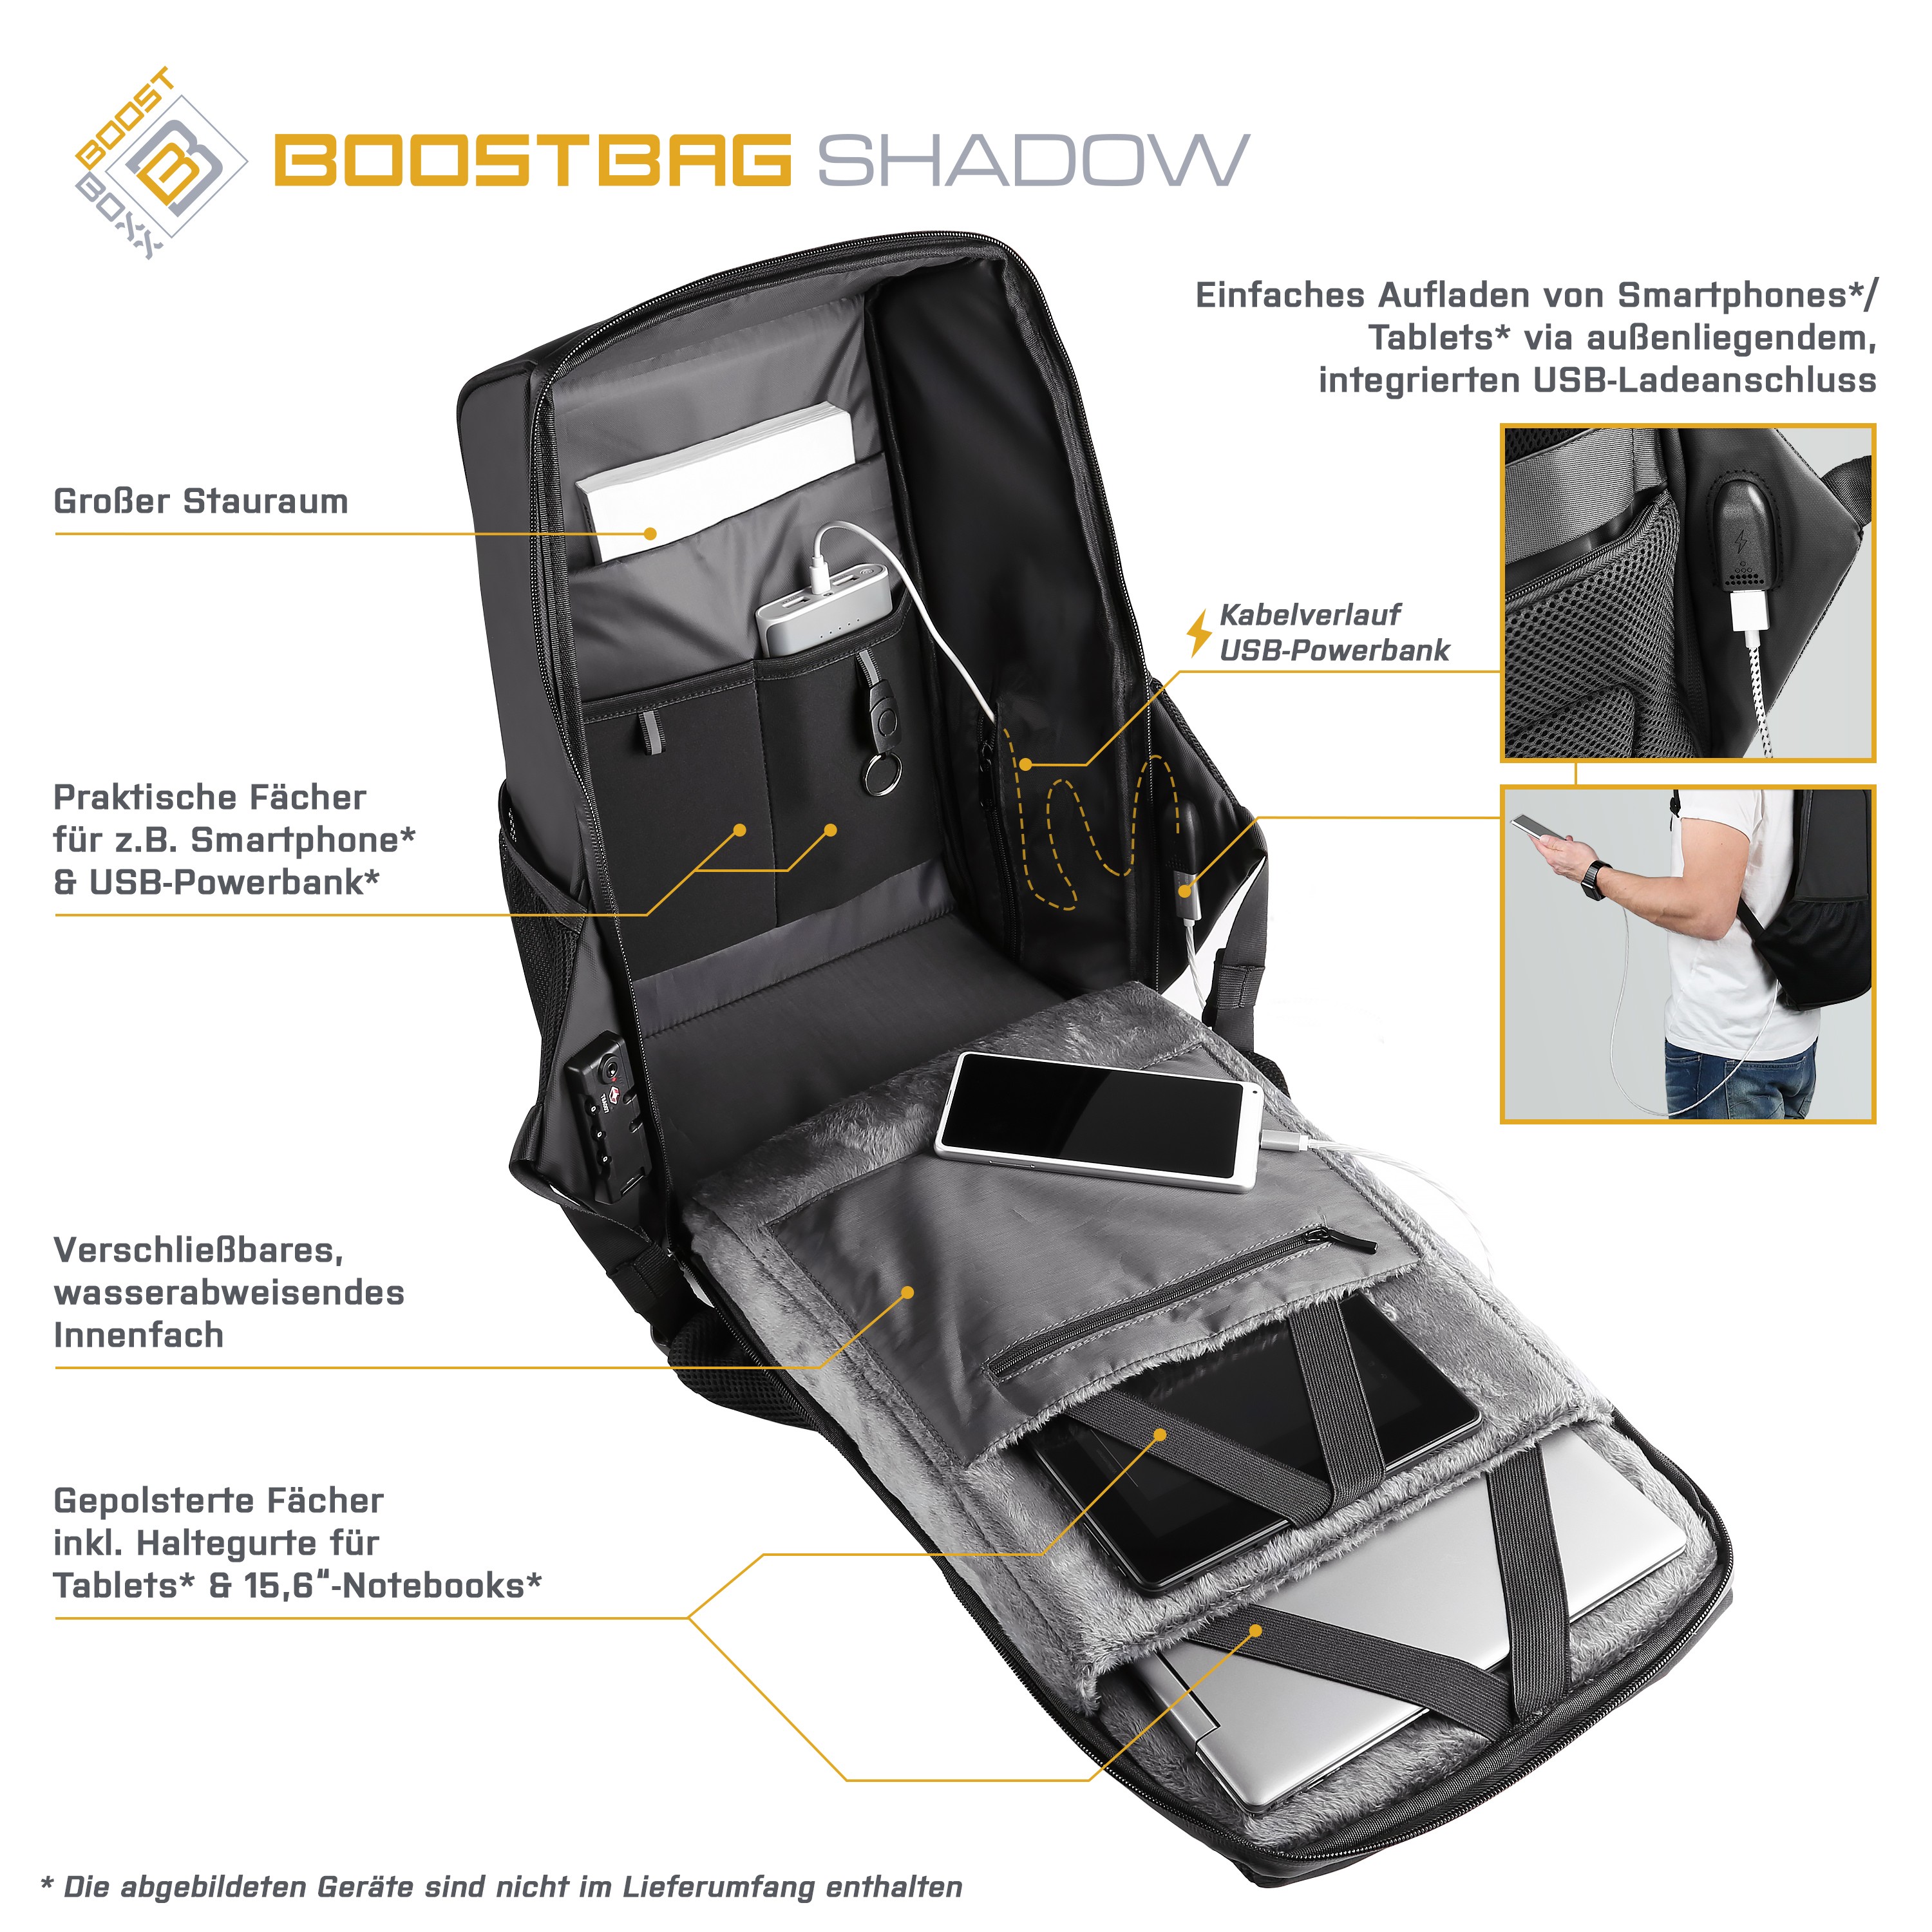 CSL Computer | up - BoostBoxx Shadow BoostBag Backpack to Notebook